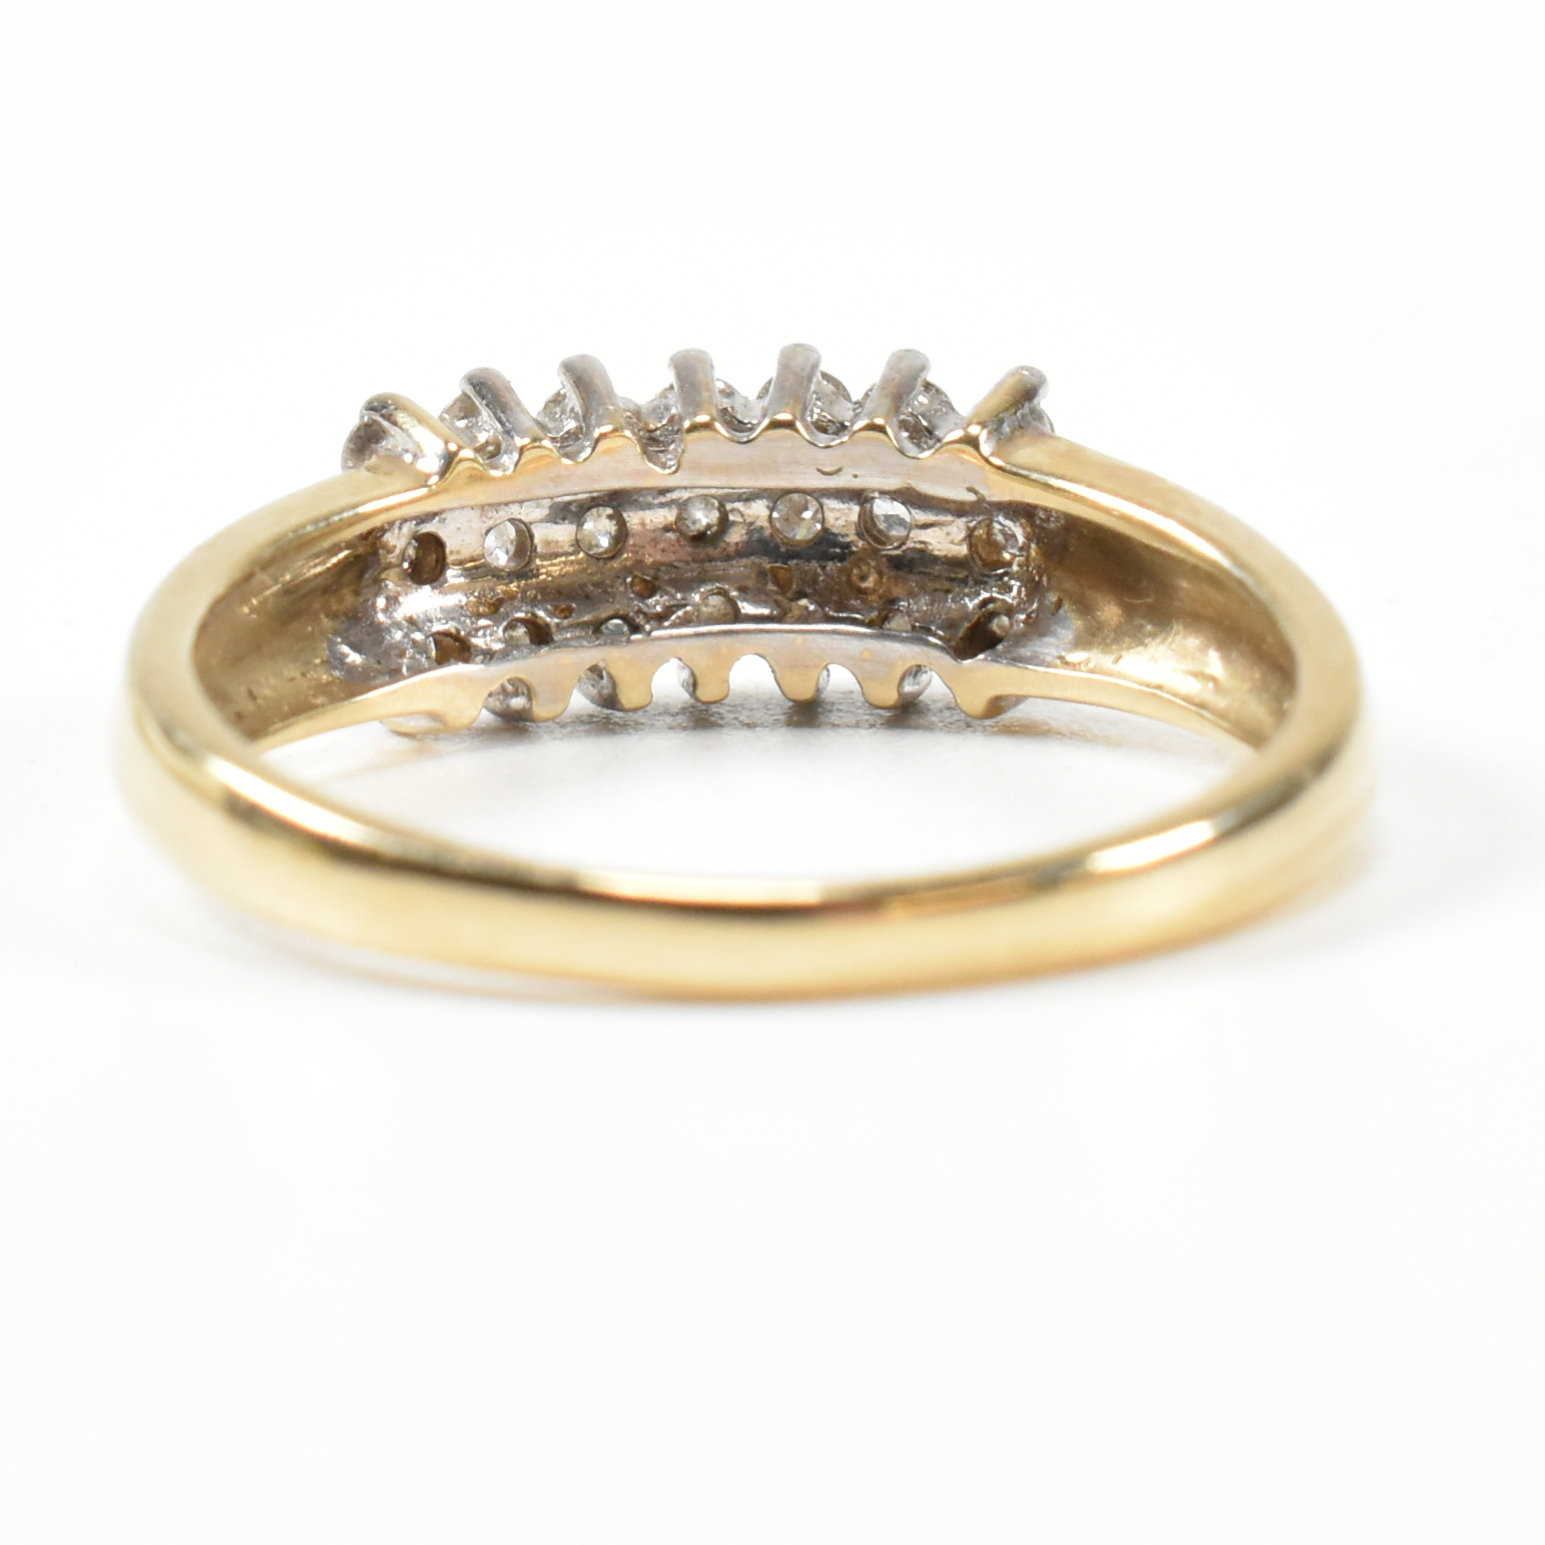 9CT GOLD & DIAMOND CLUSTER RING - Image 3 of 9